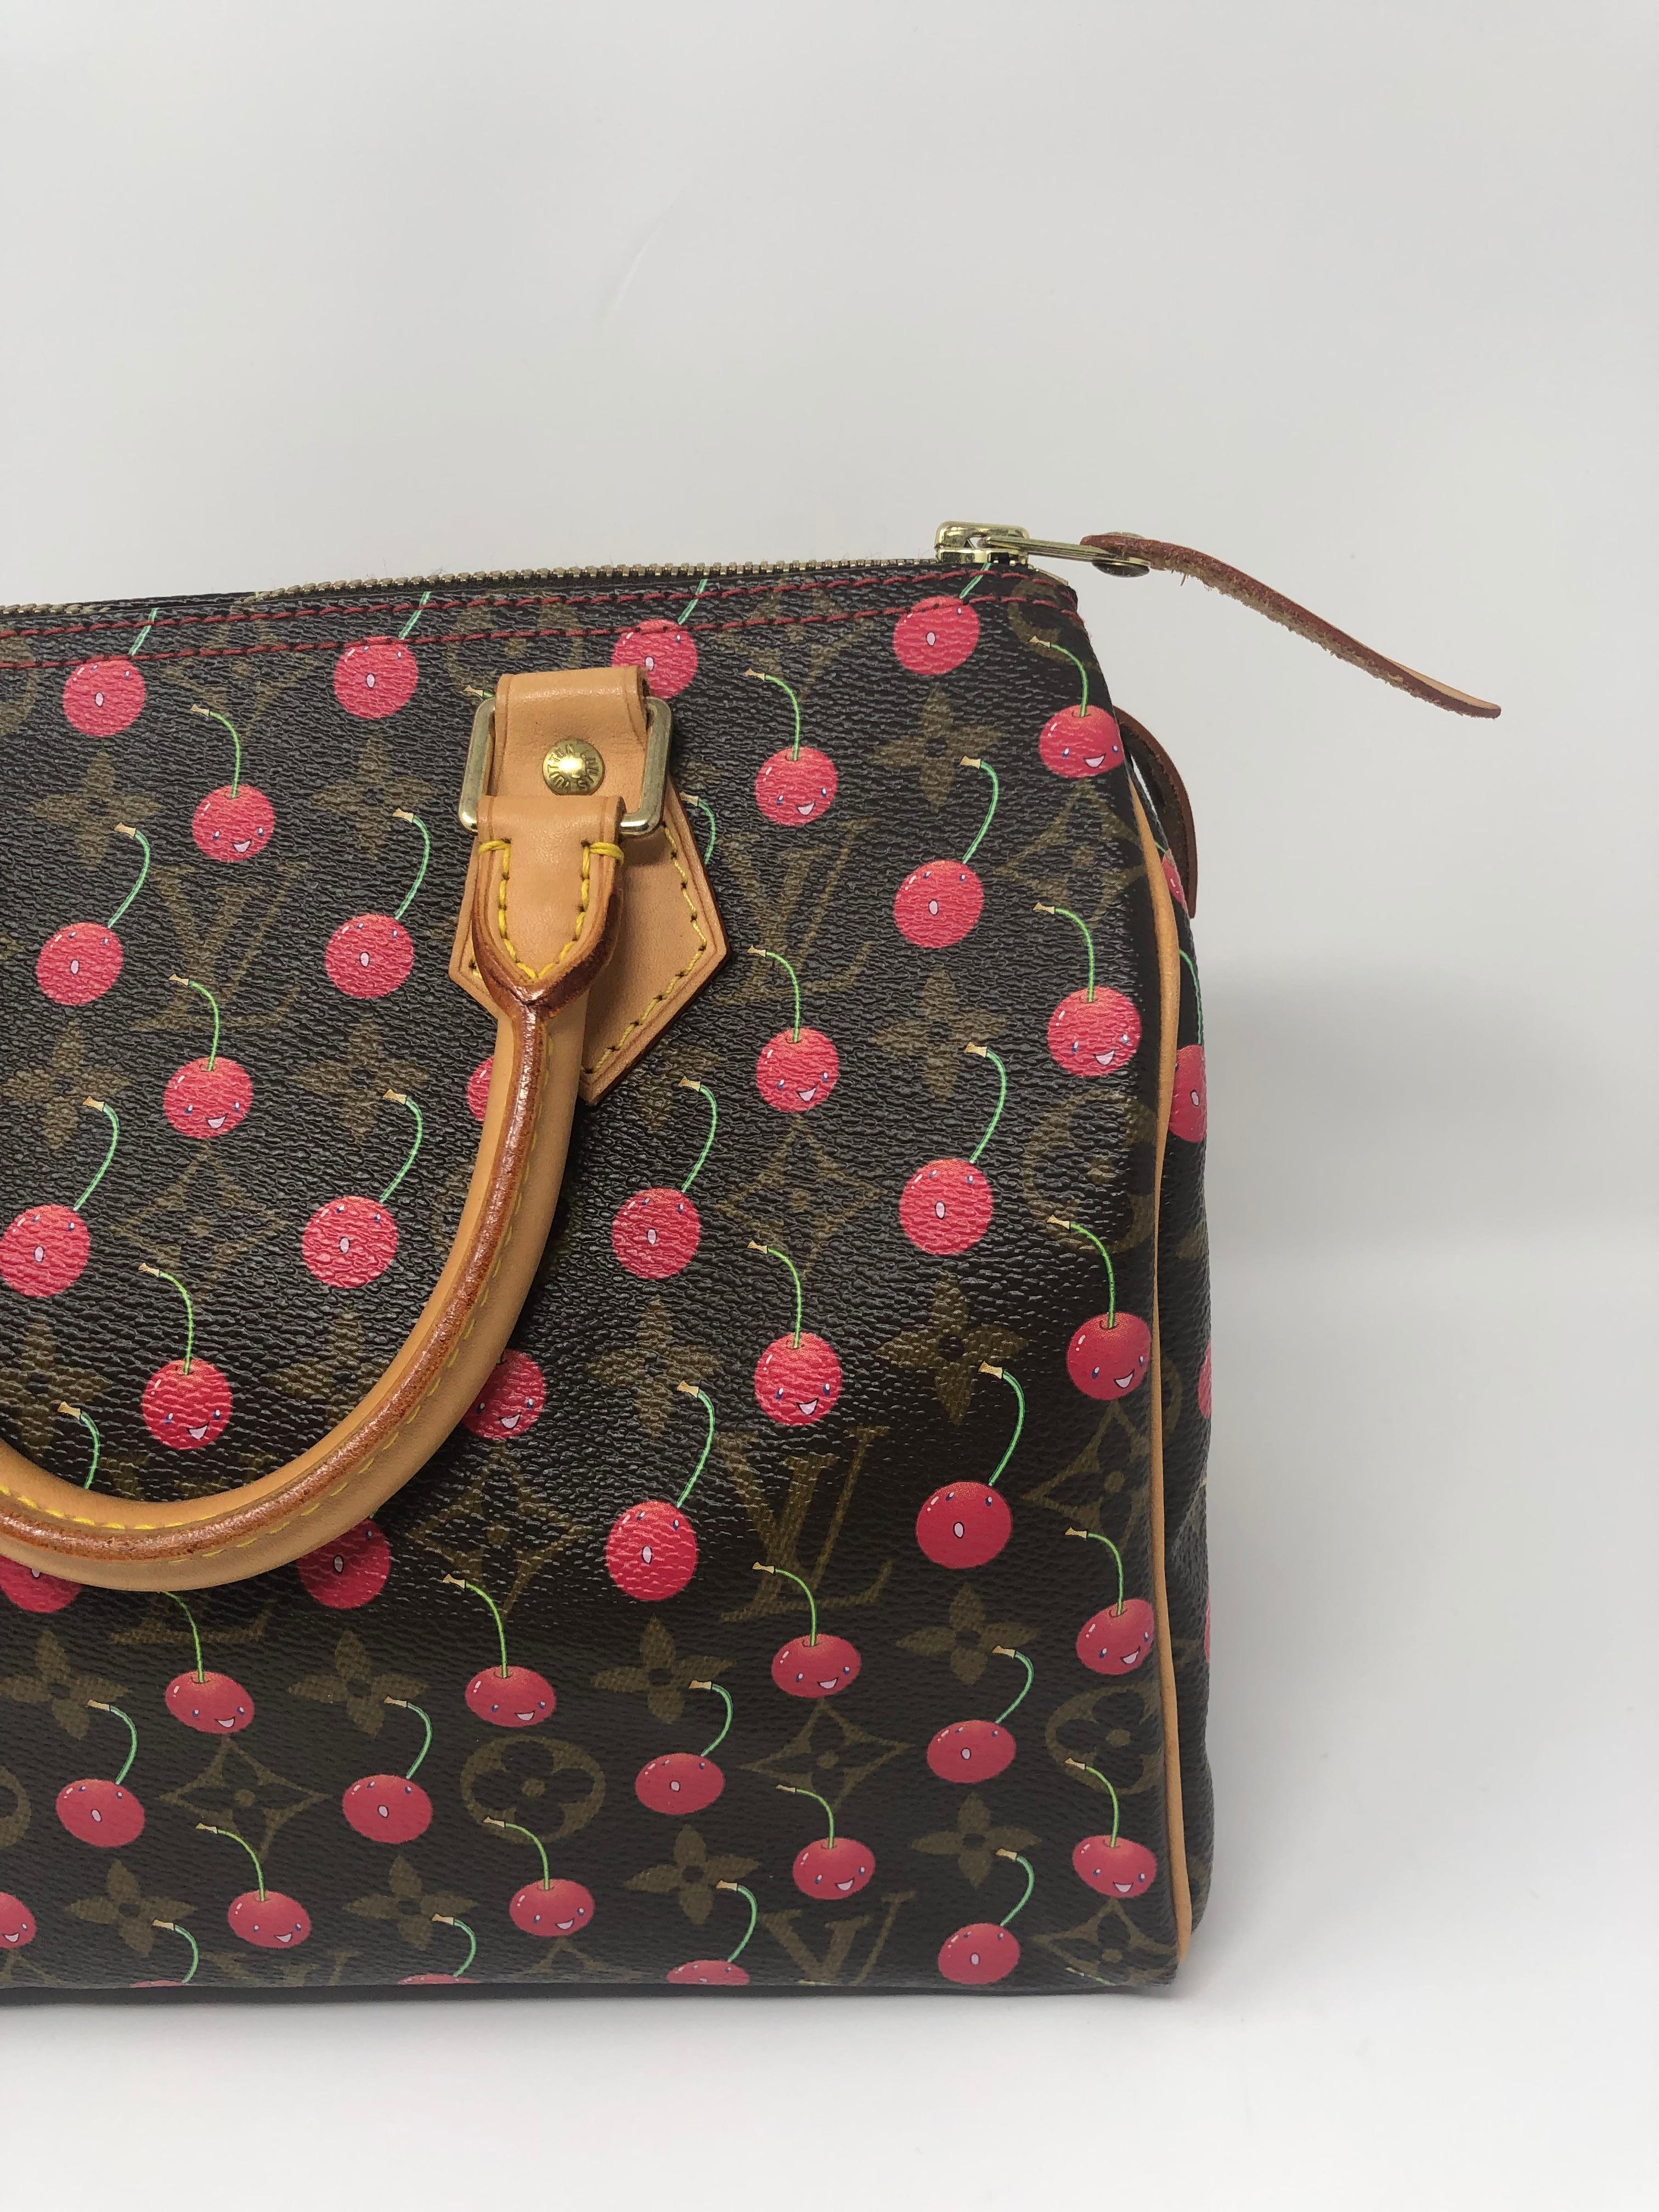 Louis Vuitton x Murakami Monogram Cherry Speedy 25. Limited edition special collaboration with famous Japanese artist Takashi Murakami. Rare and iconic. The cherries stand out in this collector's piece. Bag is in excellent condition. Includes lock